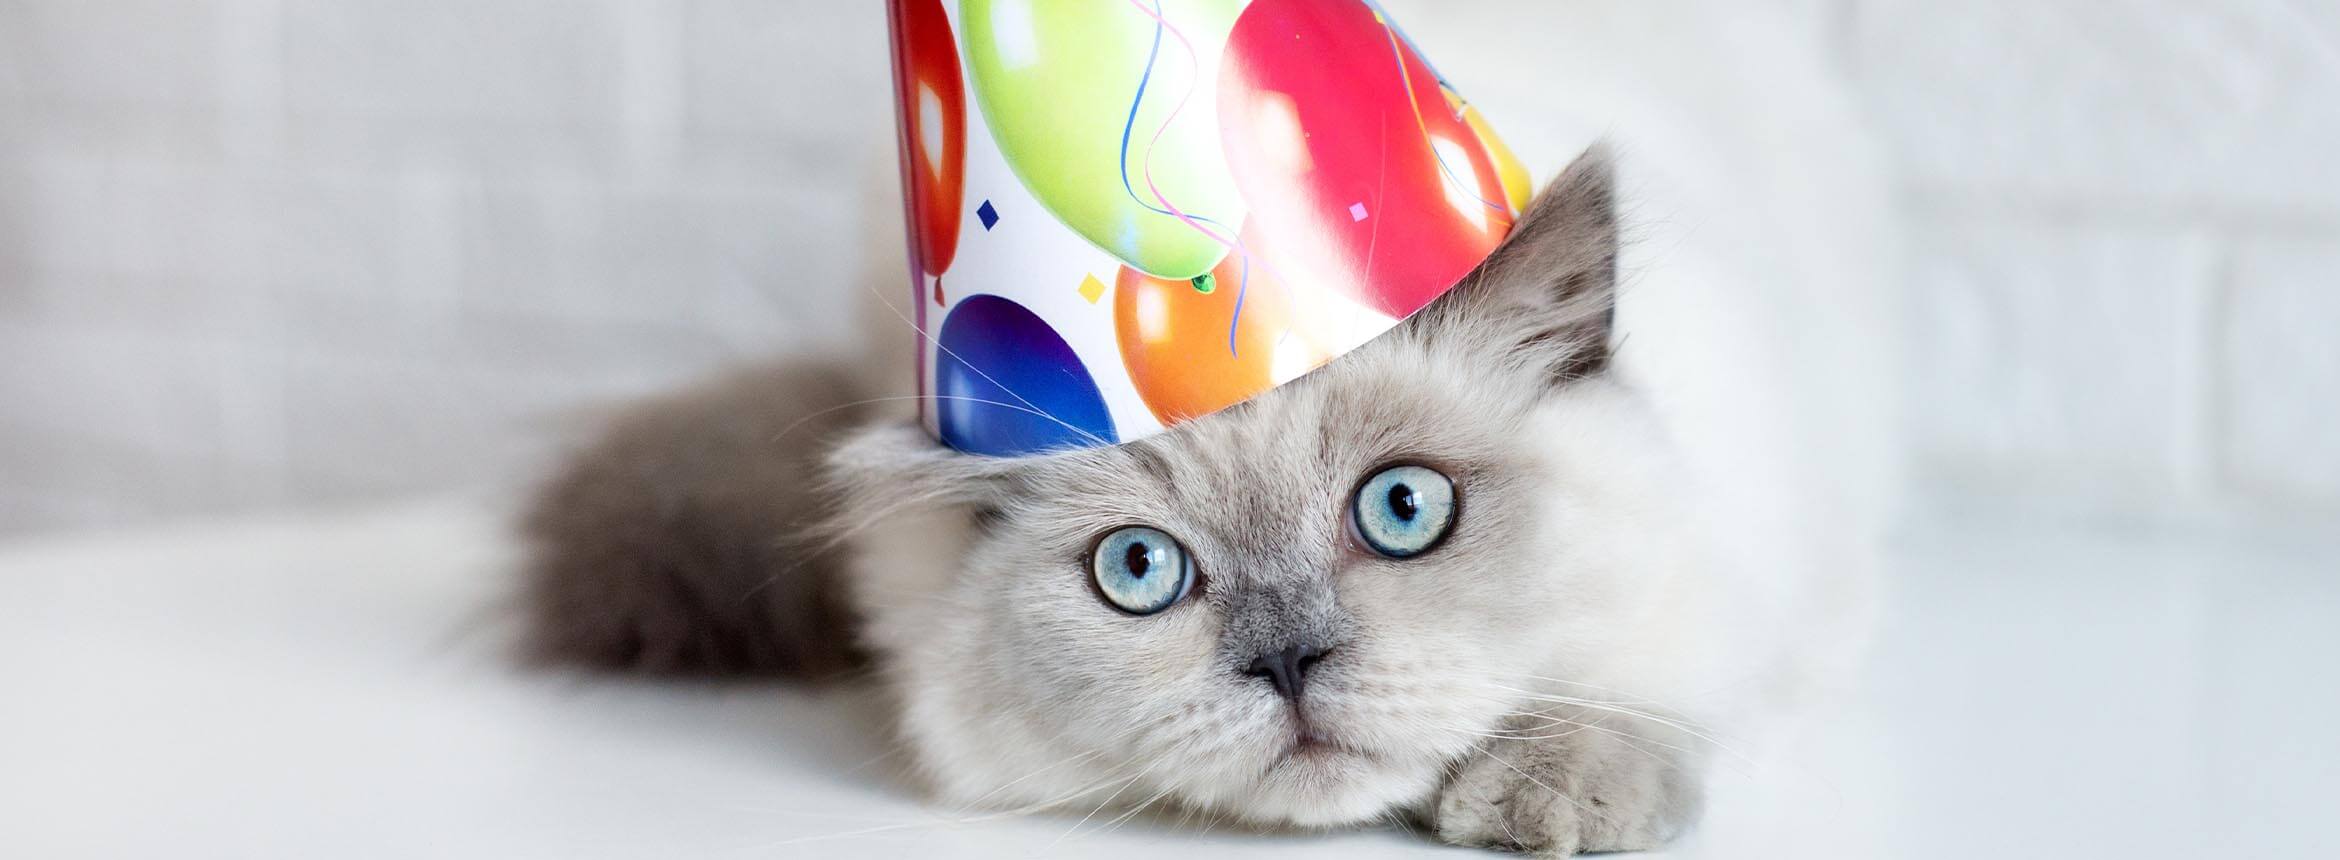 image of a cat weating a birthday hat